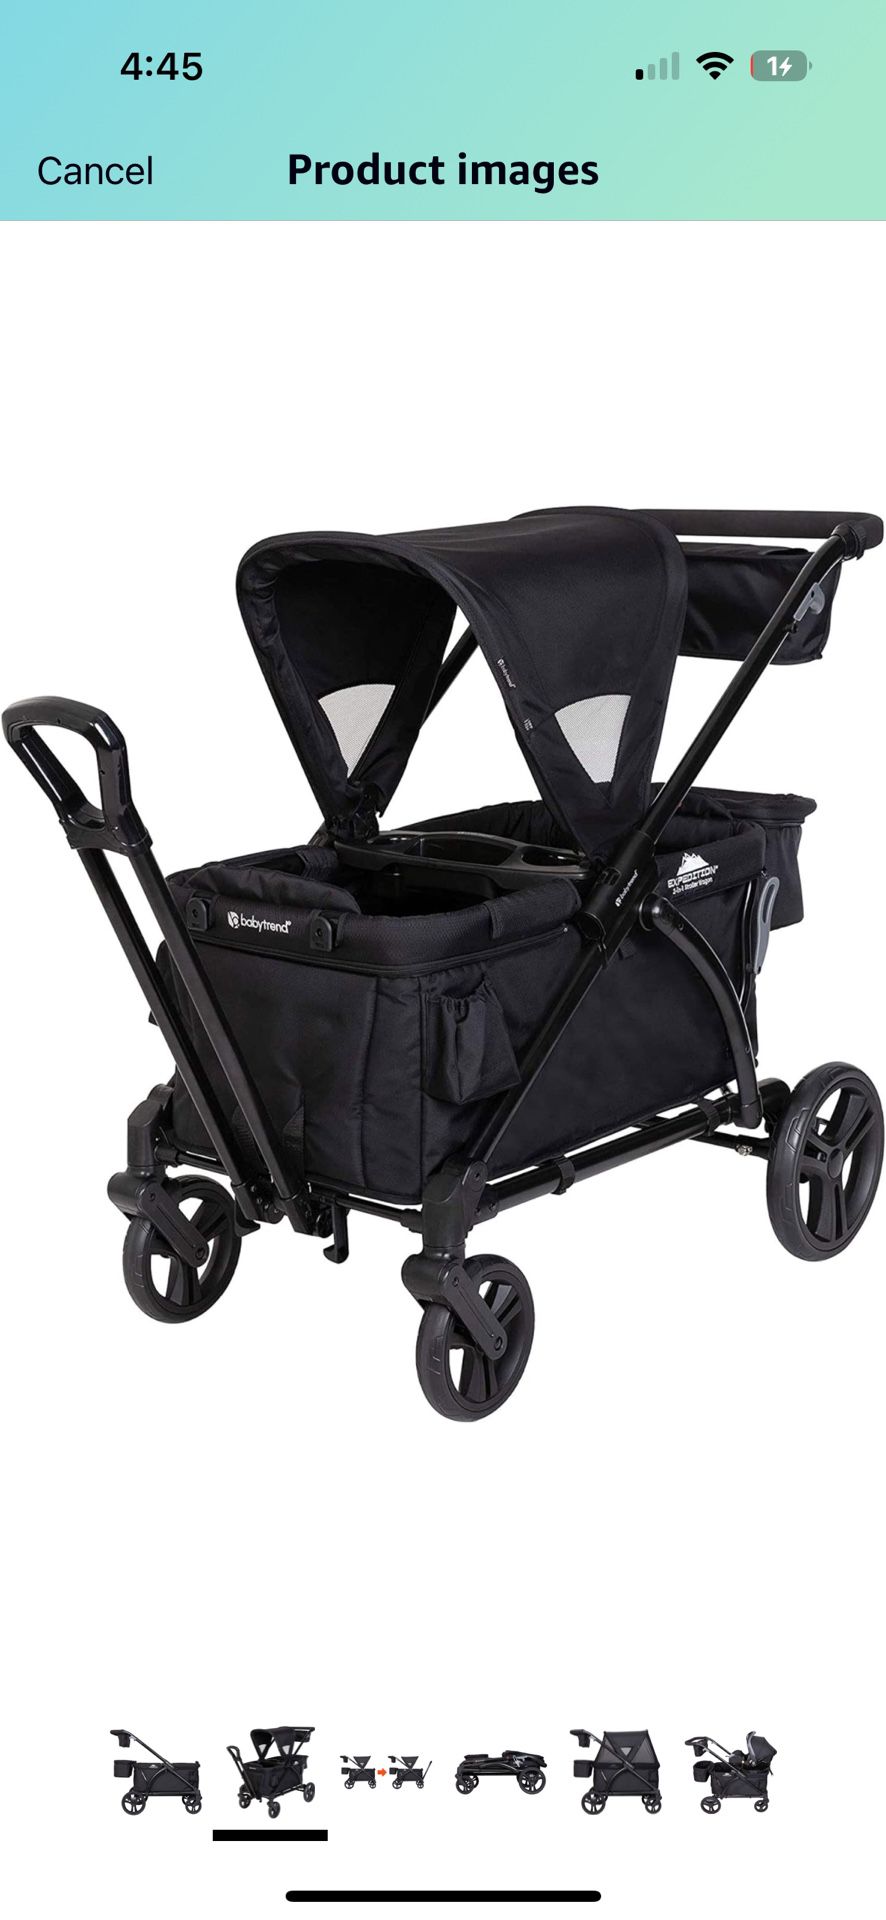 Baby Trend Expedition 2-in-1 Stroller Wagon PLUS, Ultra Black